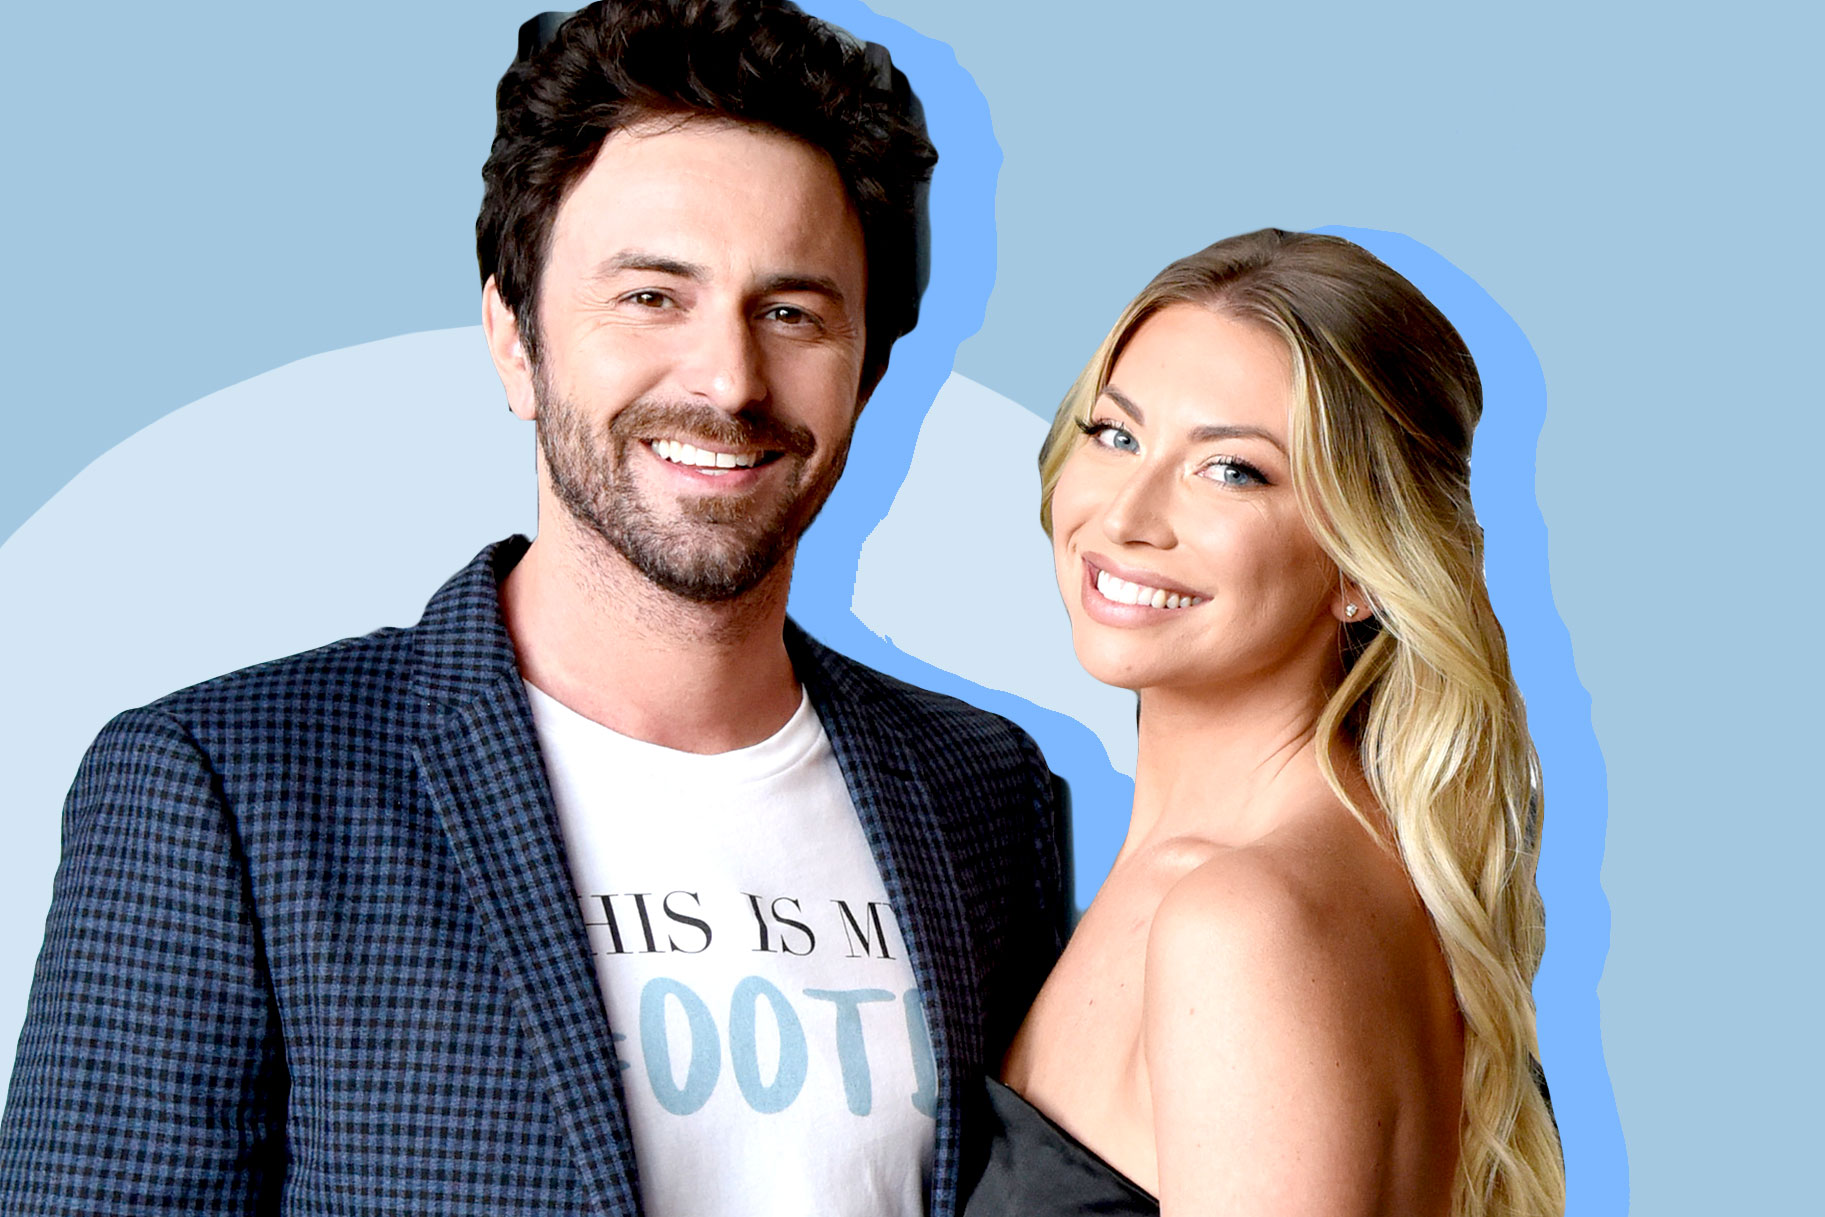 Stassi and Beau